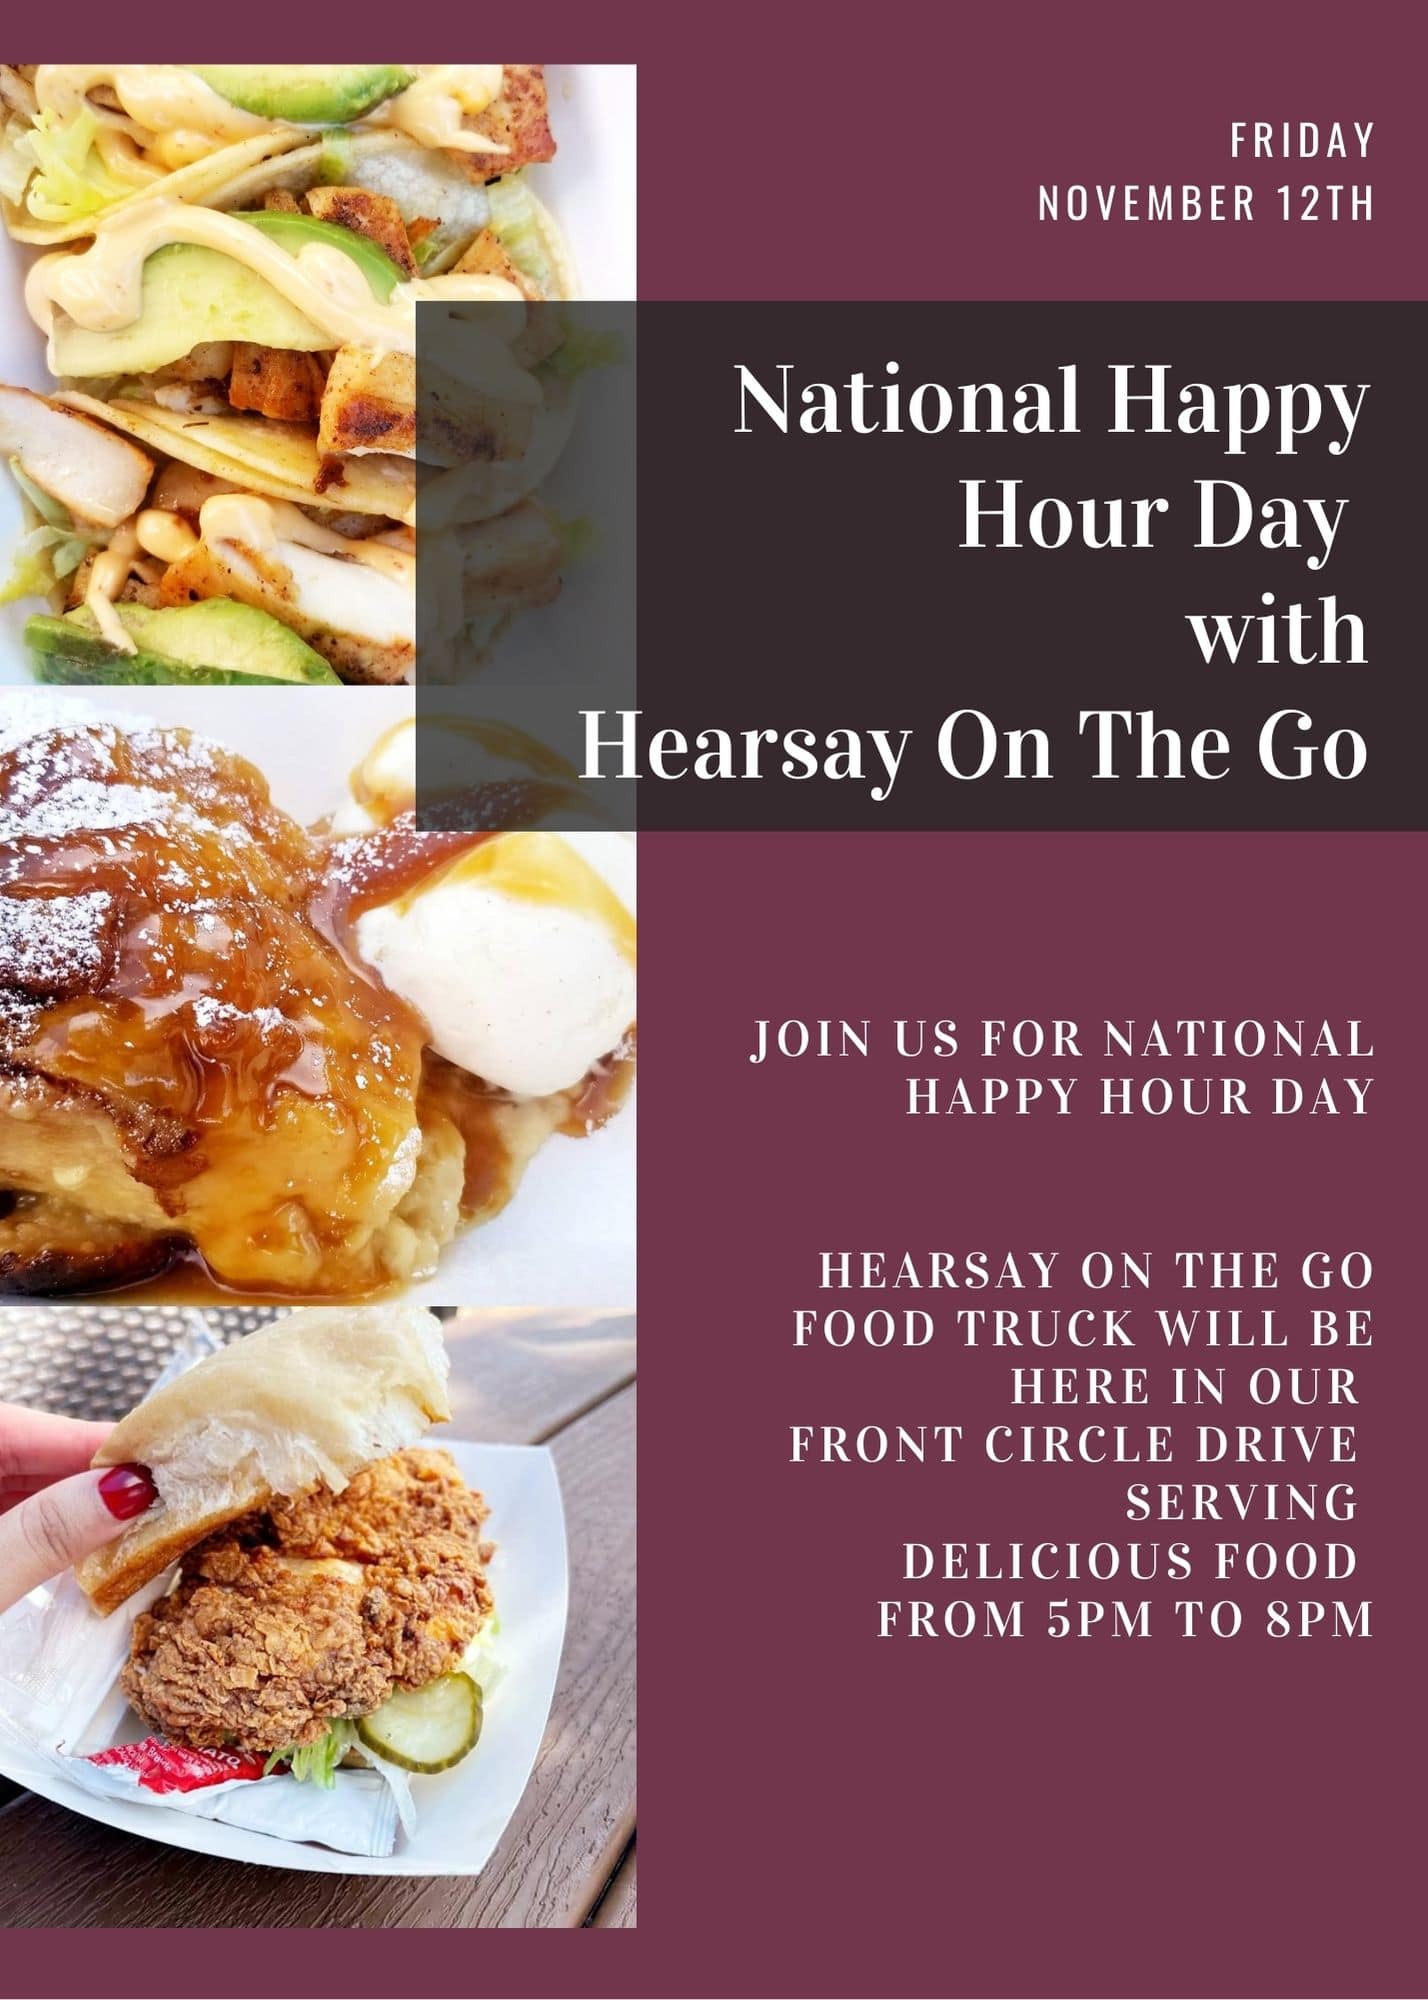 Rent apartments in The Woodlands TX and enjoy a national happy hour with Hearway on the go.